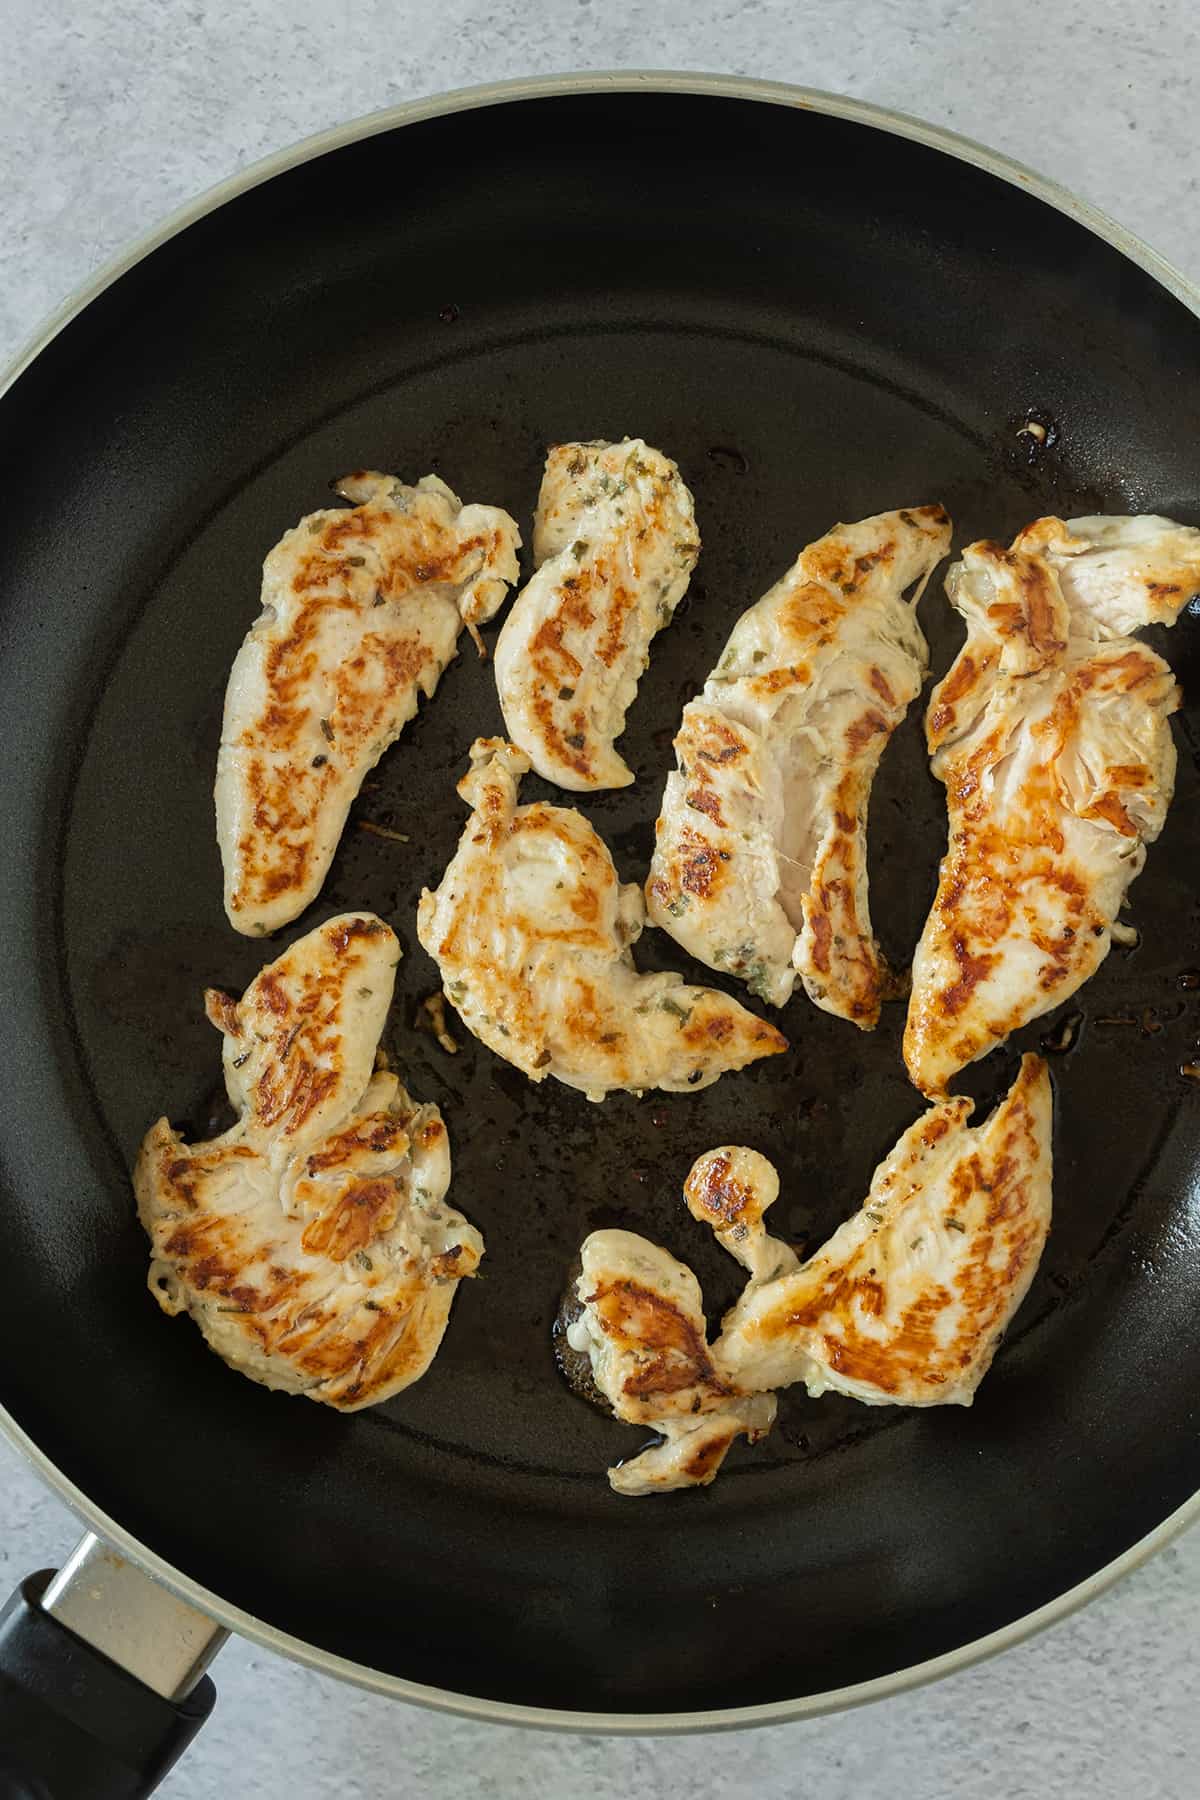 Chicken strips cooking in a black skillet.